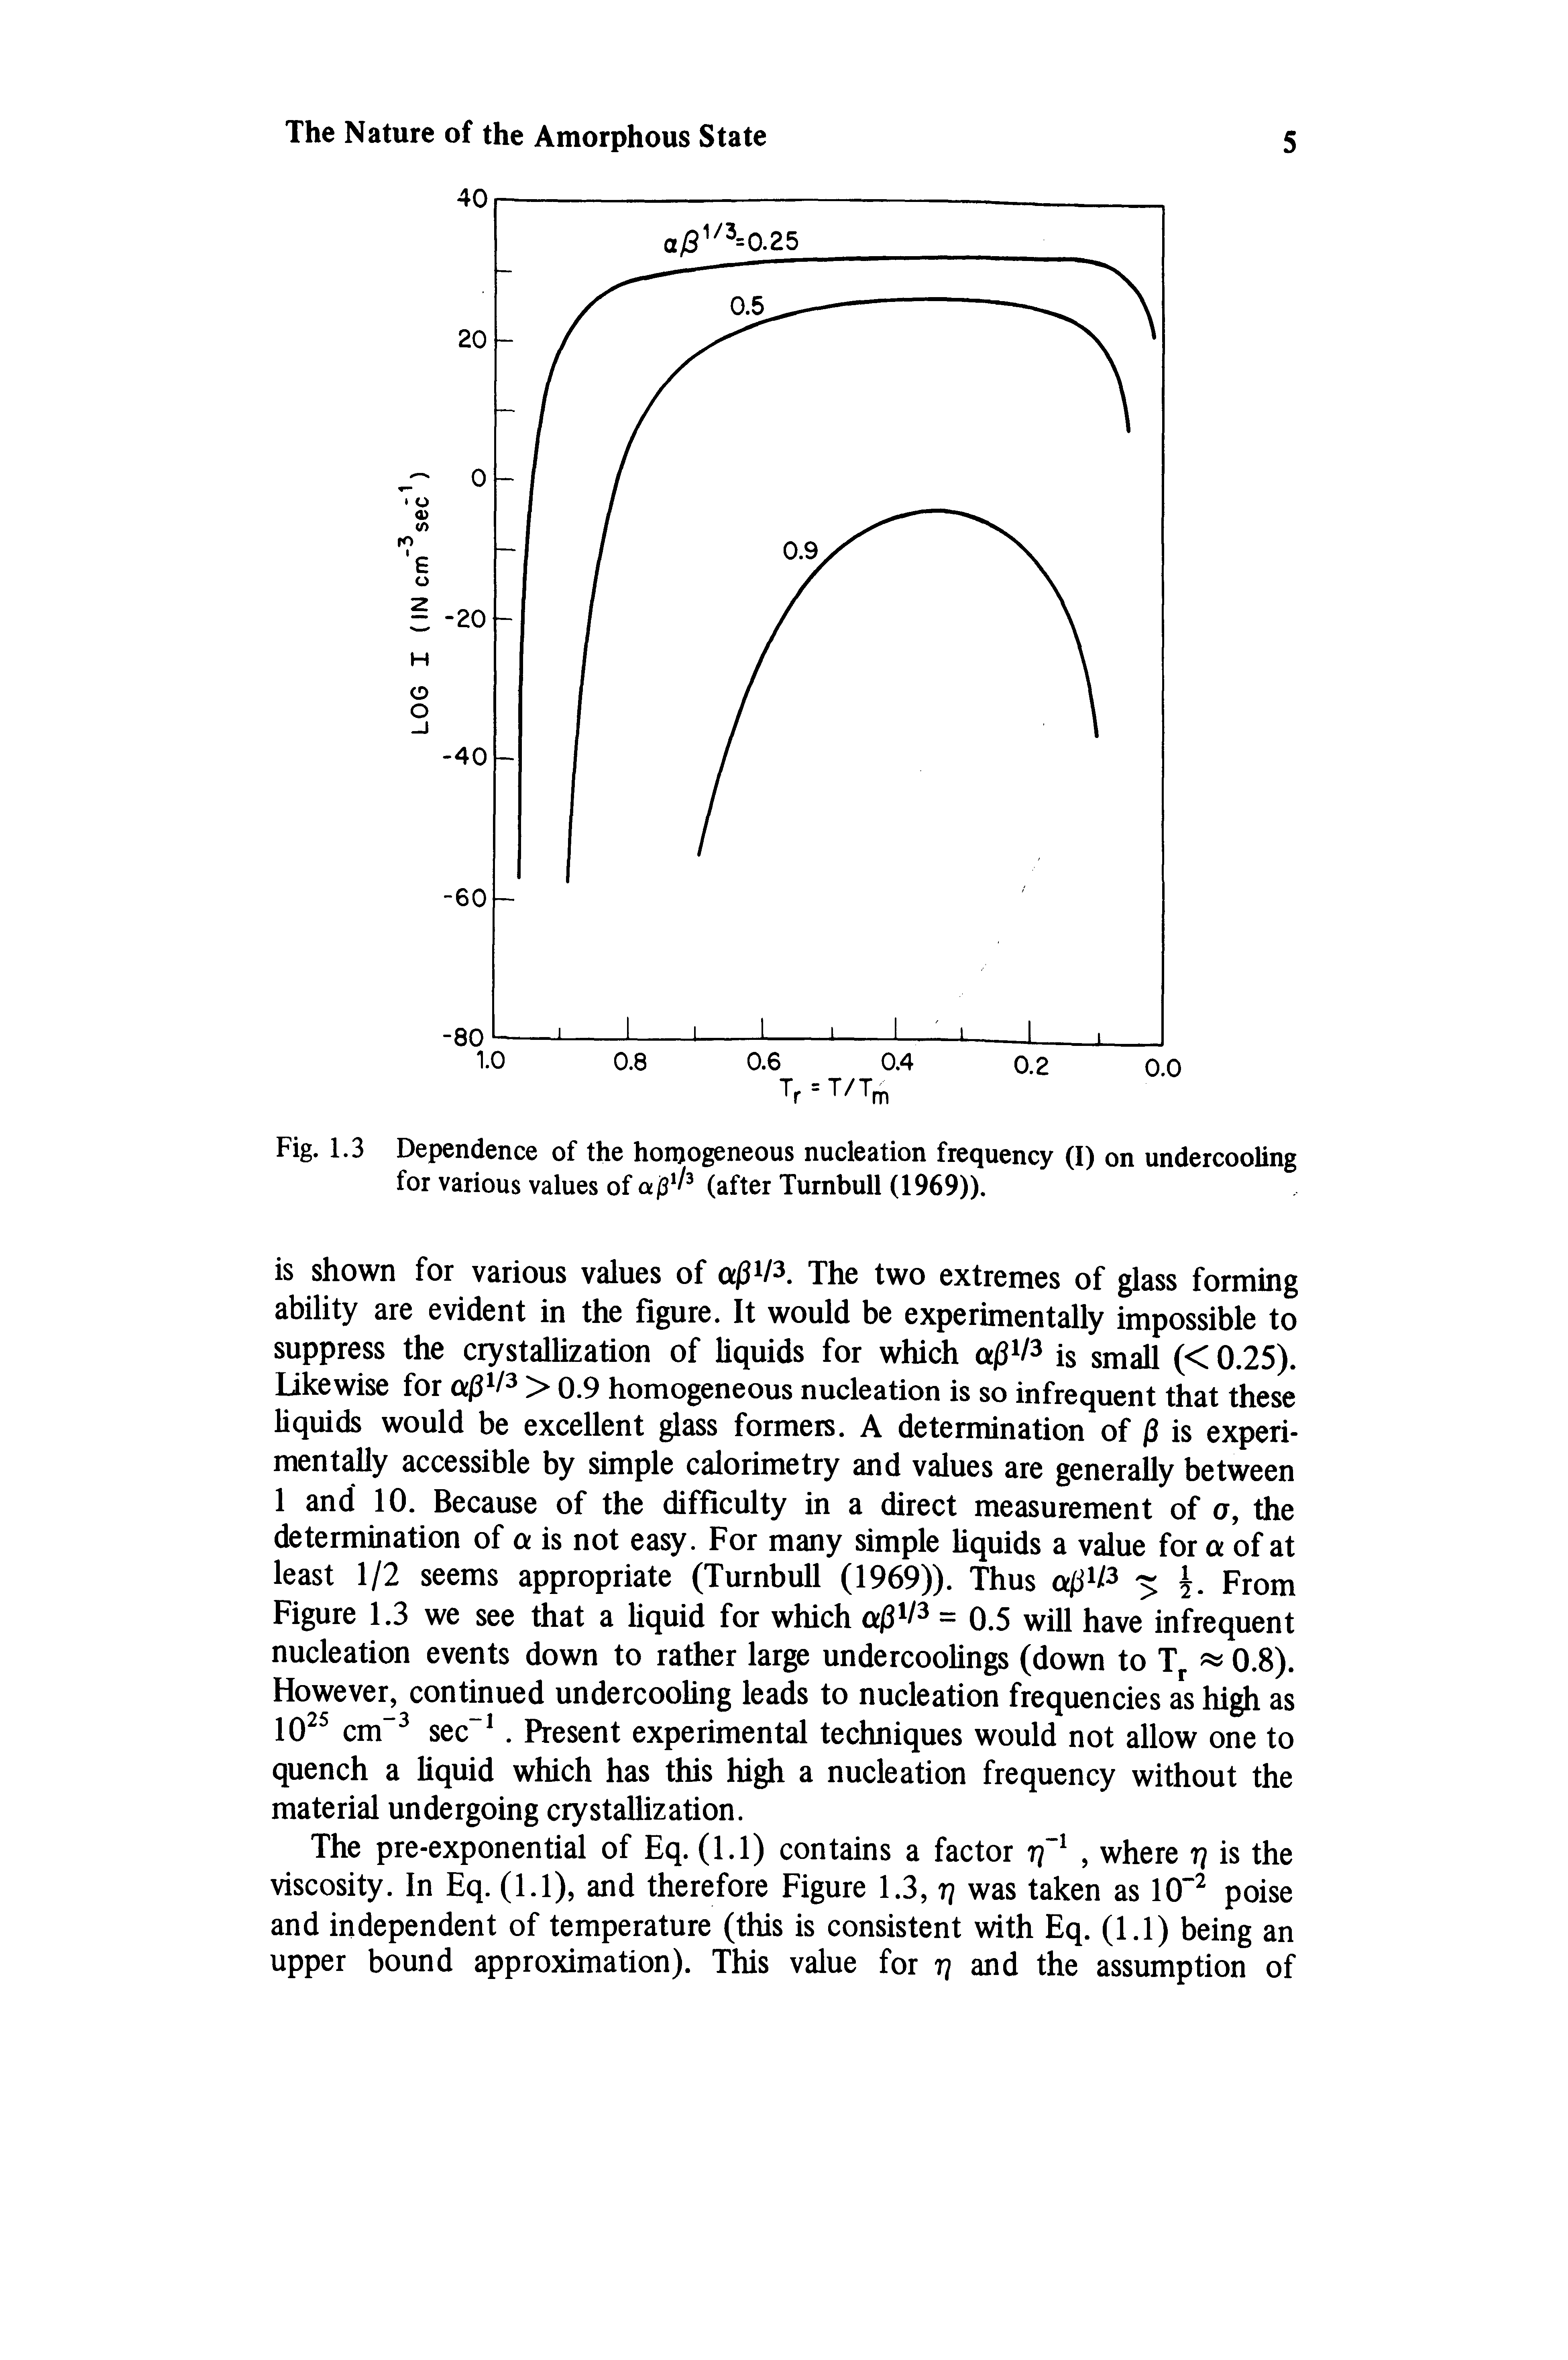 Fig. 1.3 Dependence of the homogeneous nucleation frequency (I) on undercooling for various values of (after Turnbull (1969)).